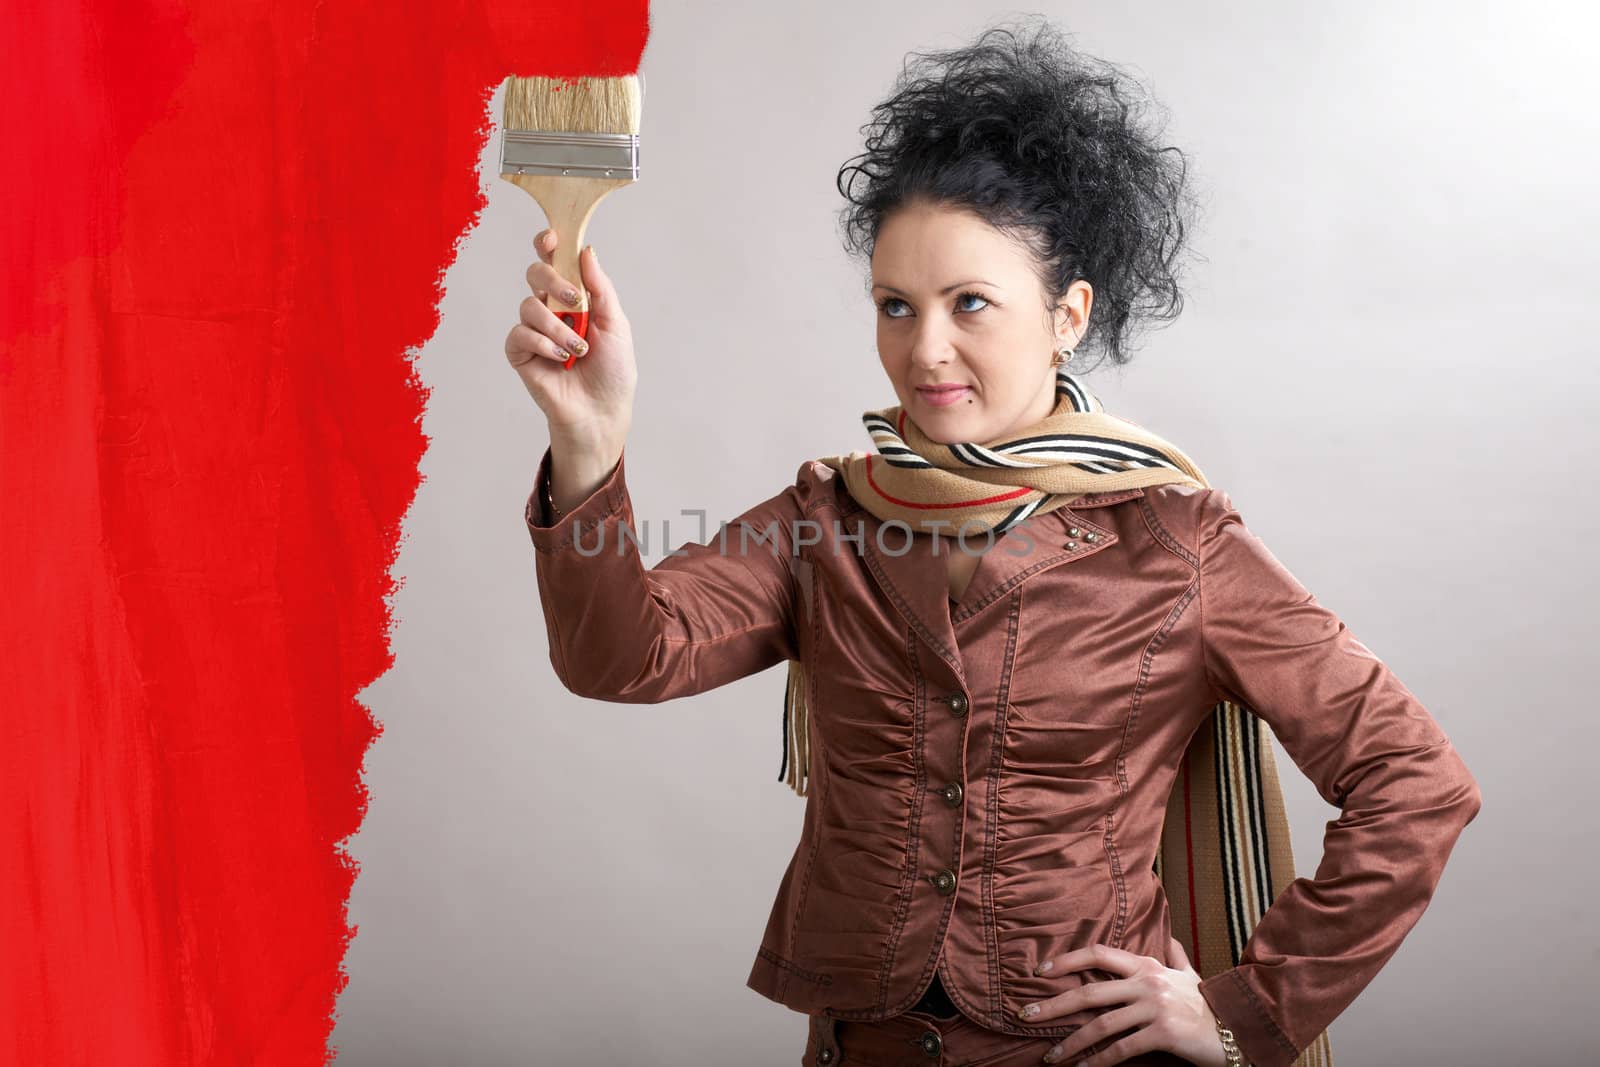 An image a girl painting red area